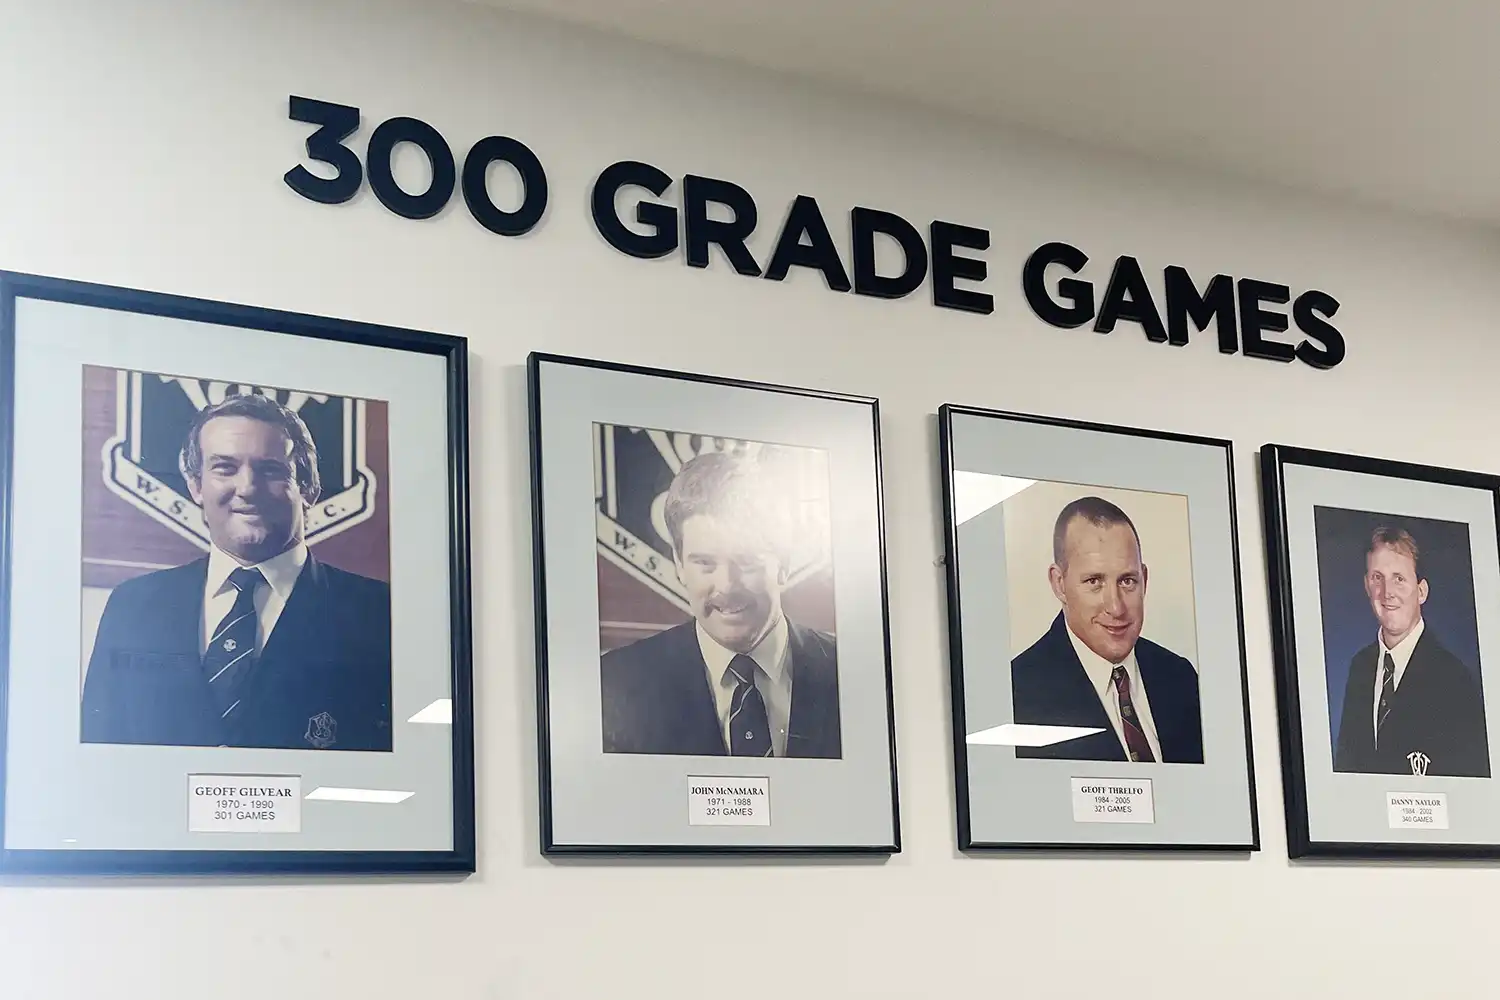 300 Grade Games 3D signage above framed photos on wall